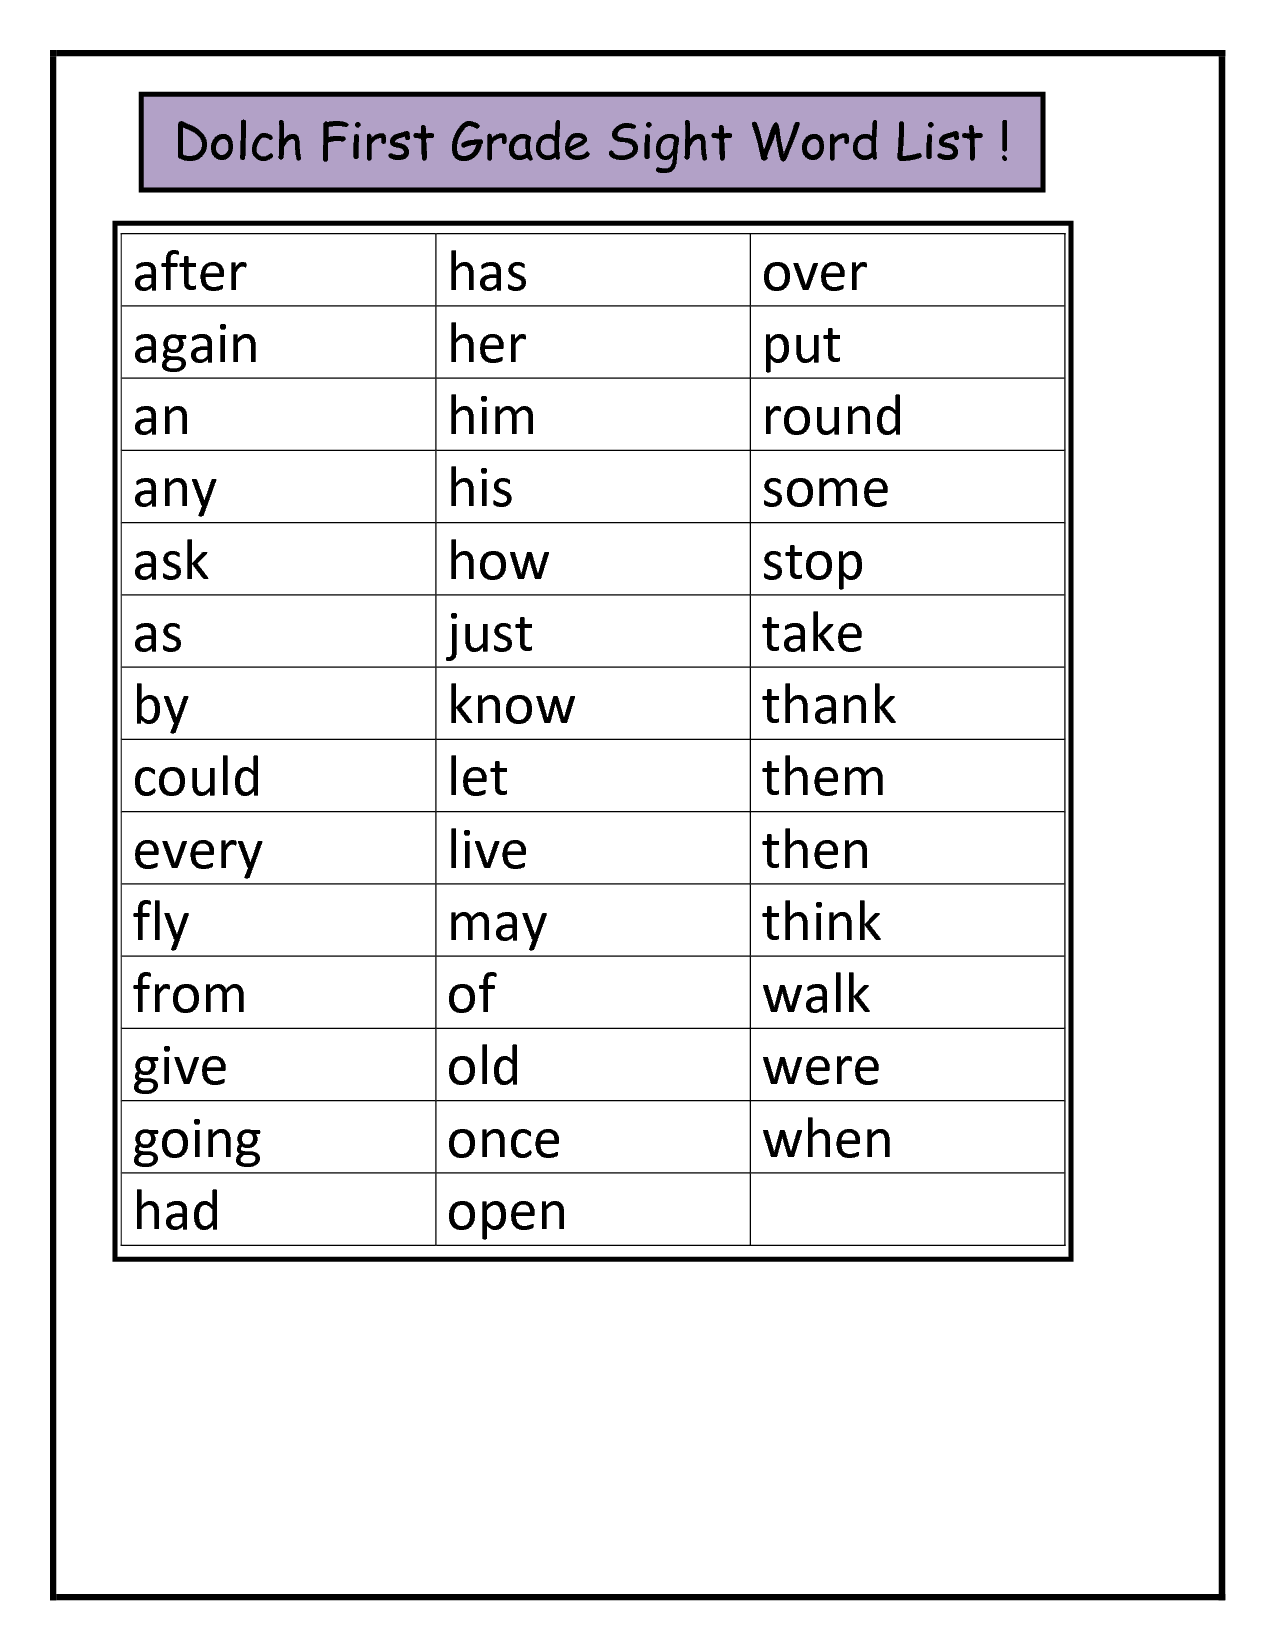 printable-dolch-sight-words-flash-cards